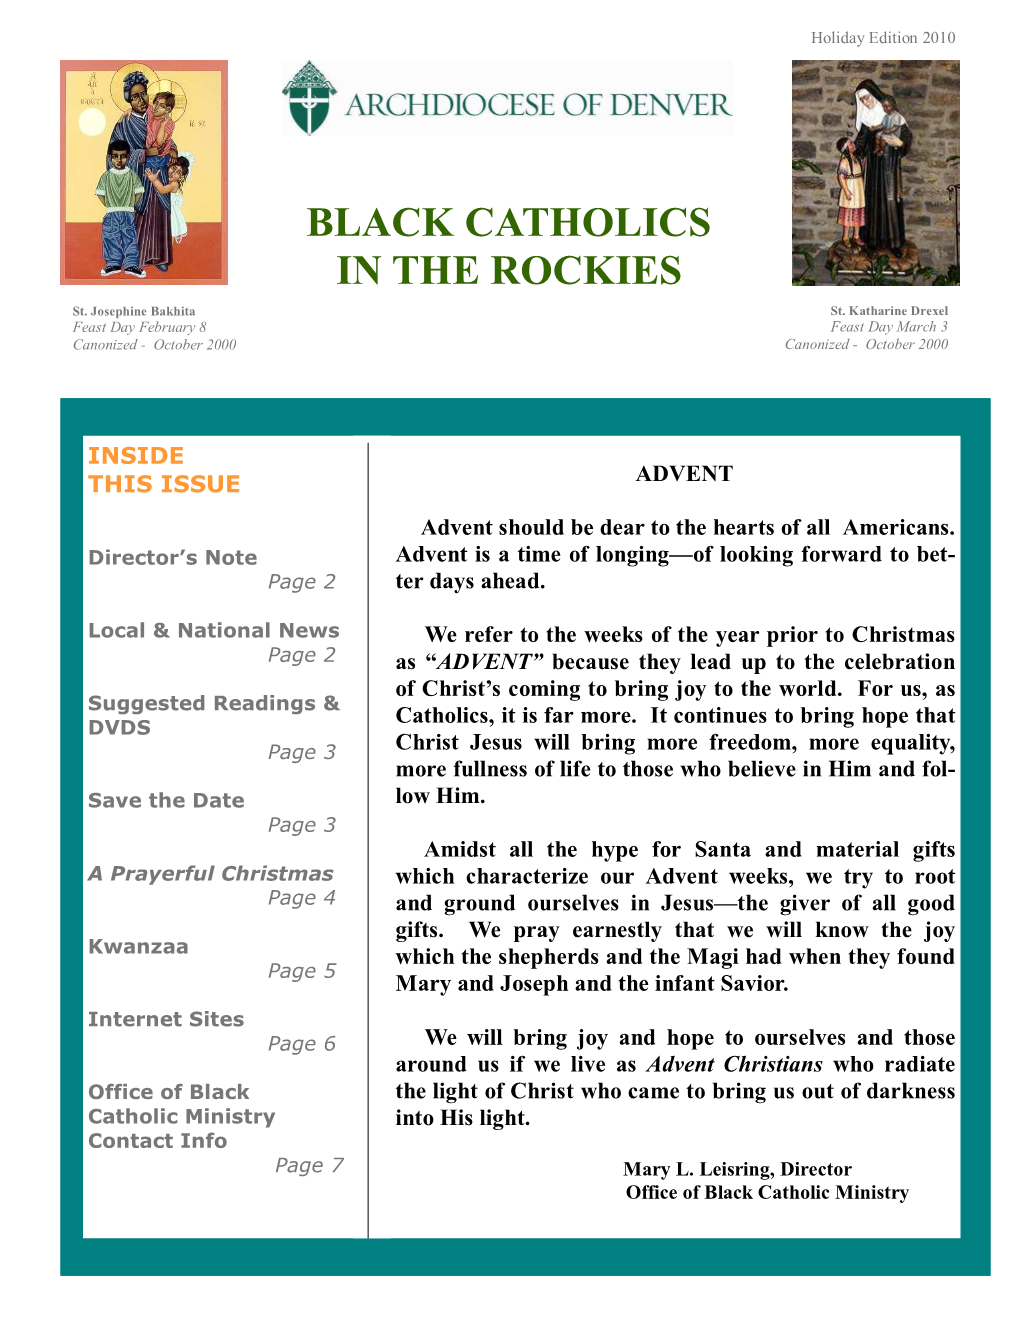 BCM Newsletter 2010 Holiday Edition